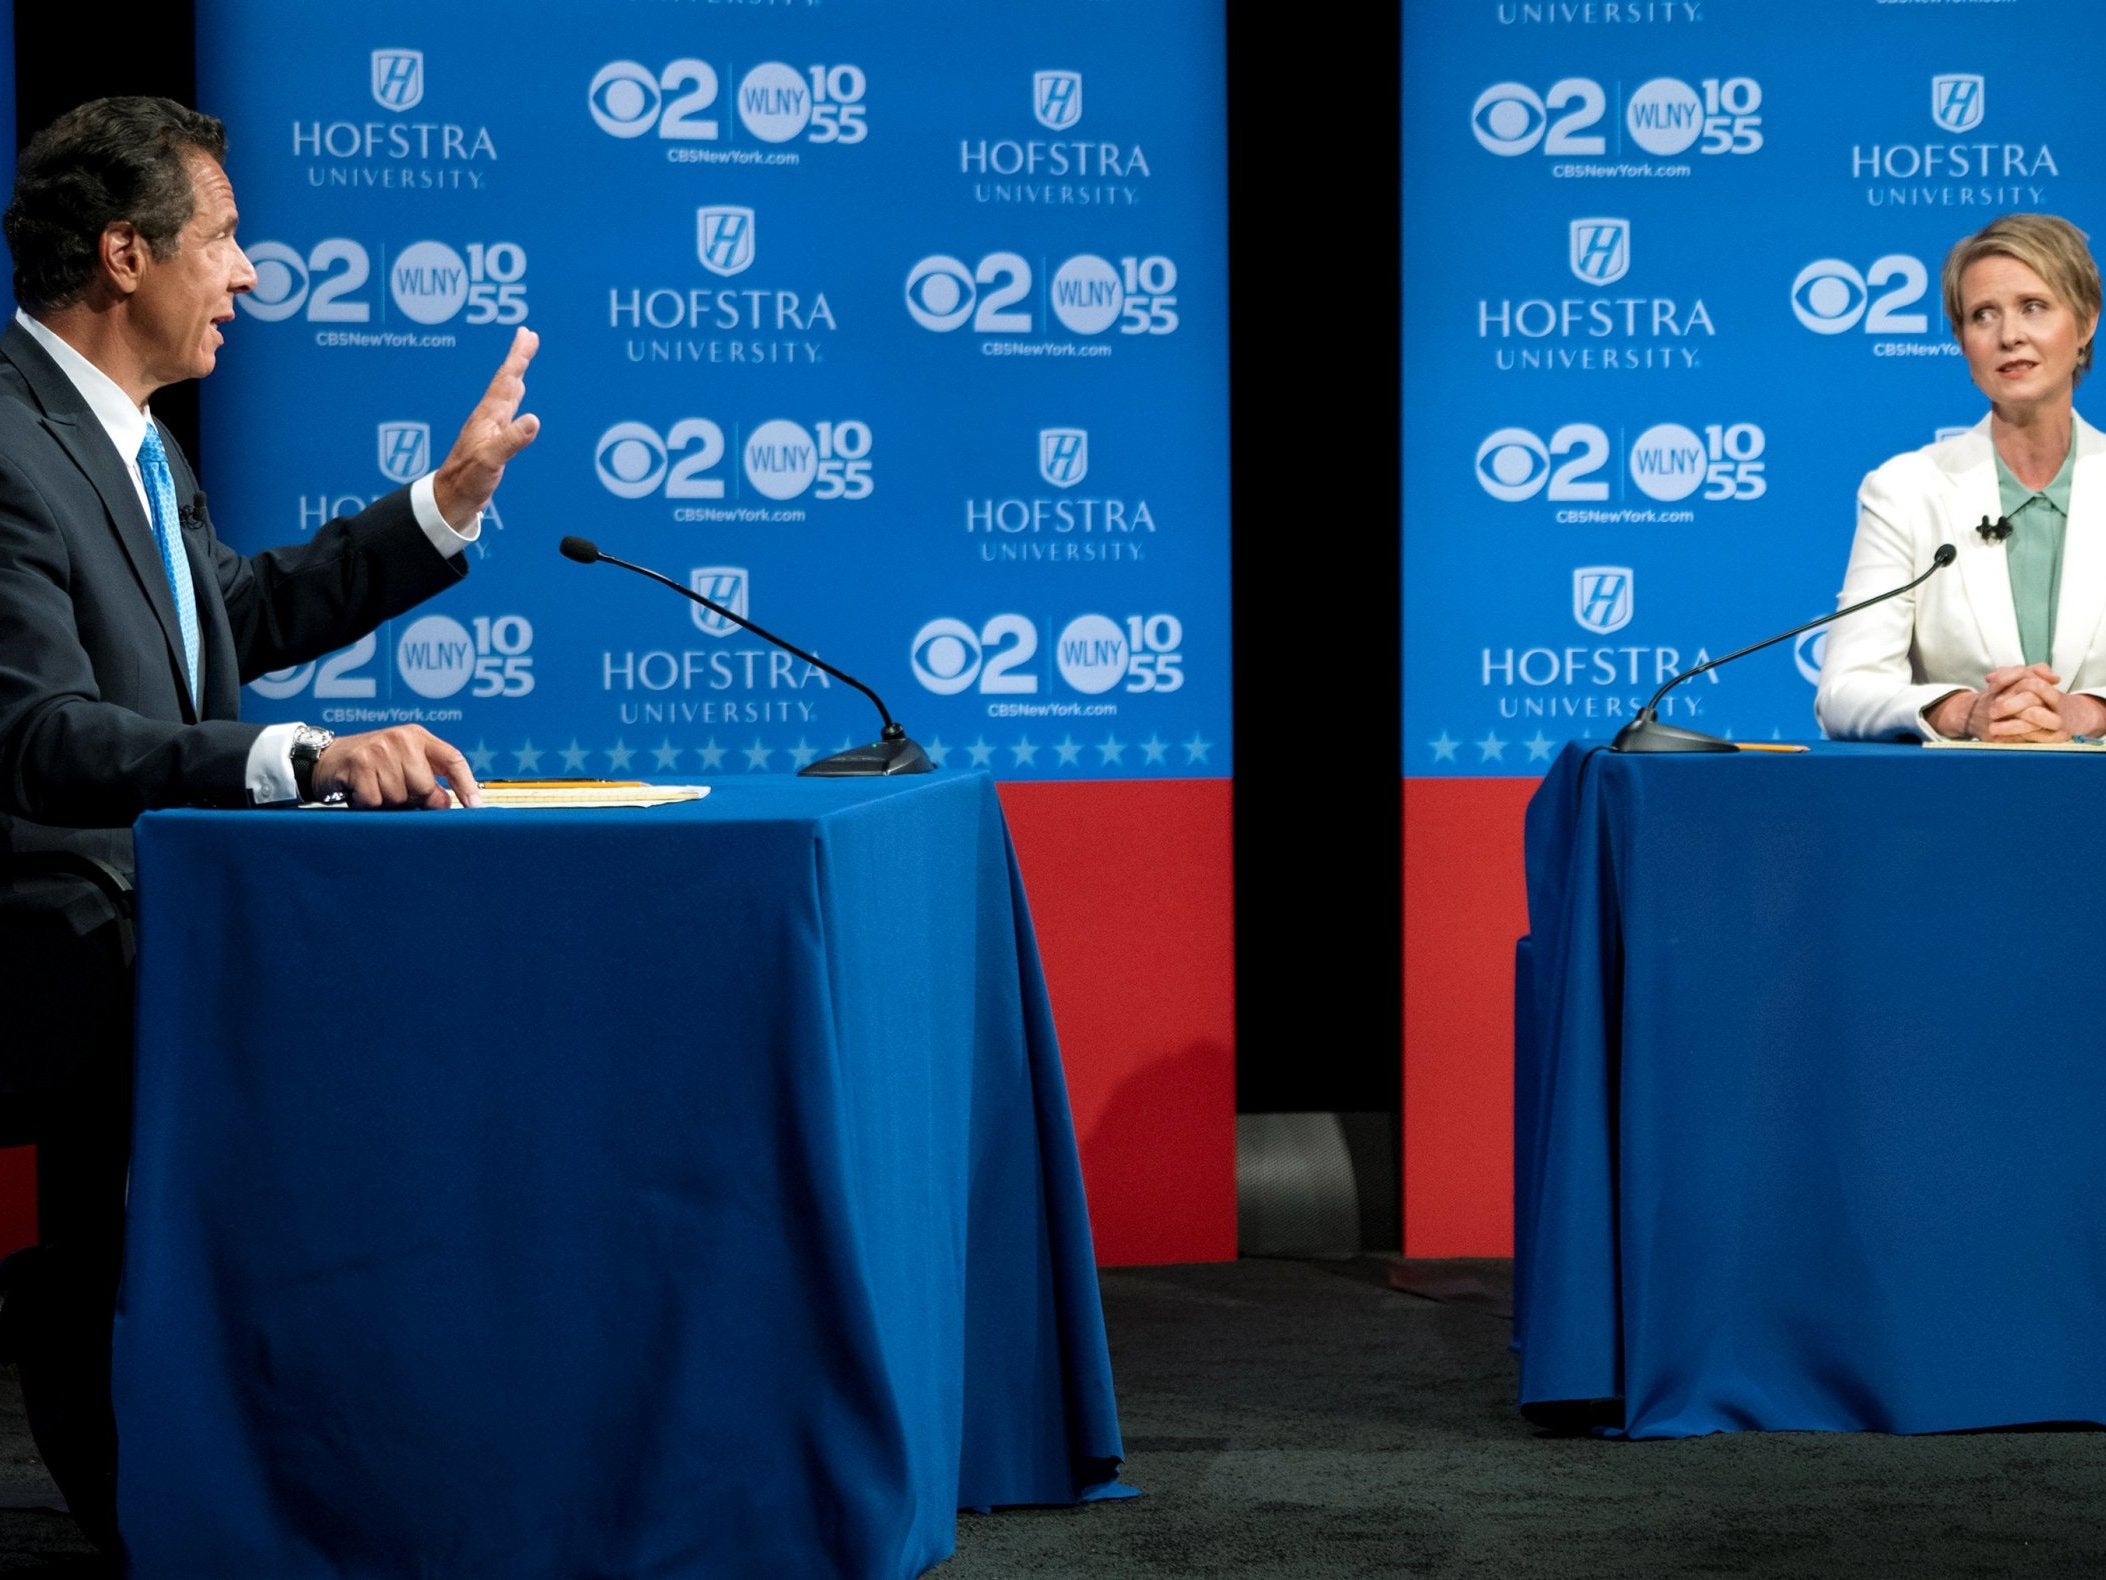 The candidates disagreed on a range of issues that divided them during the debate